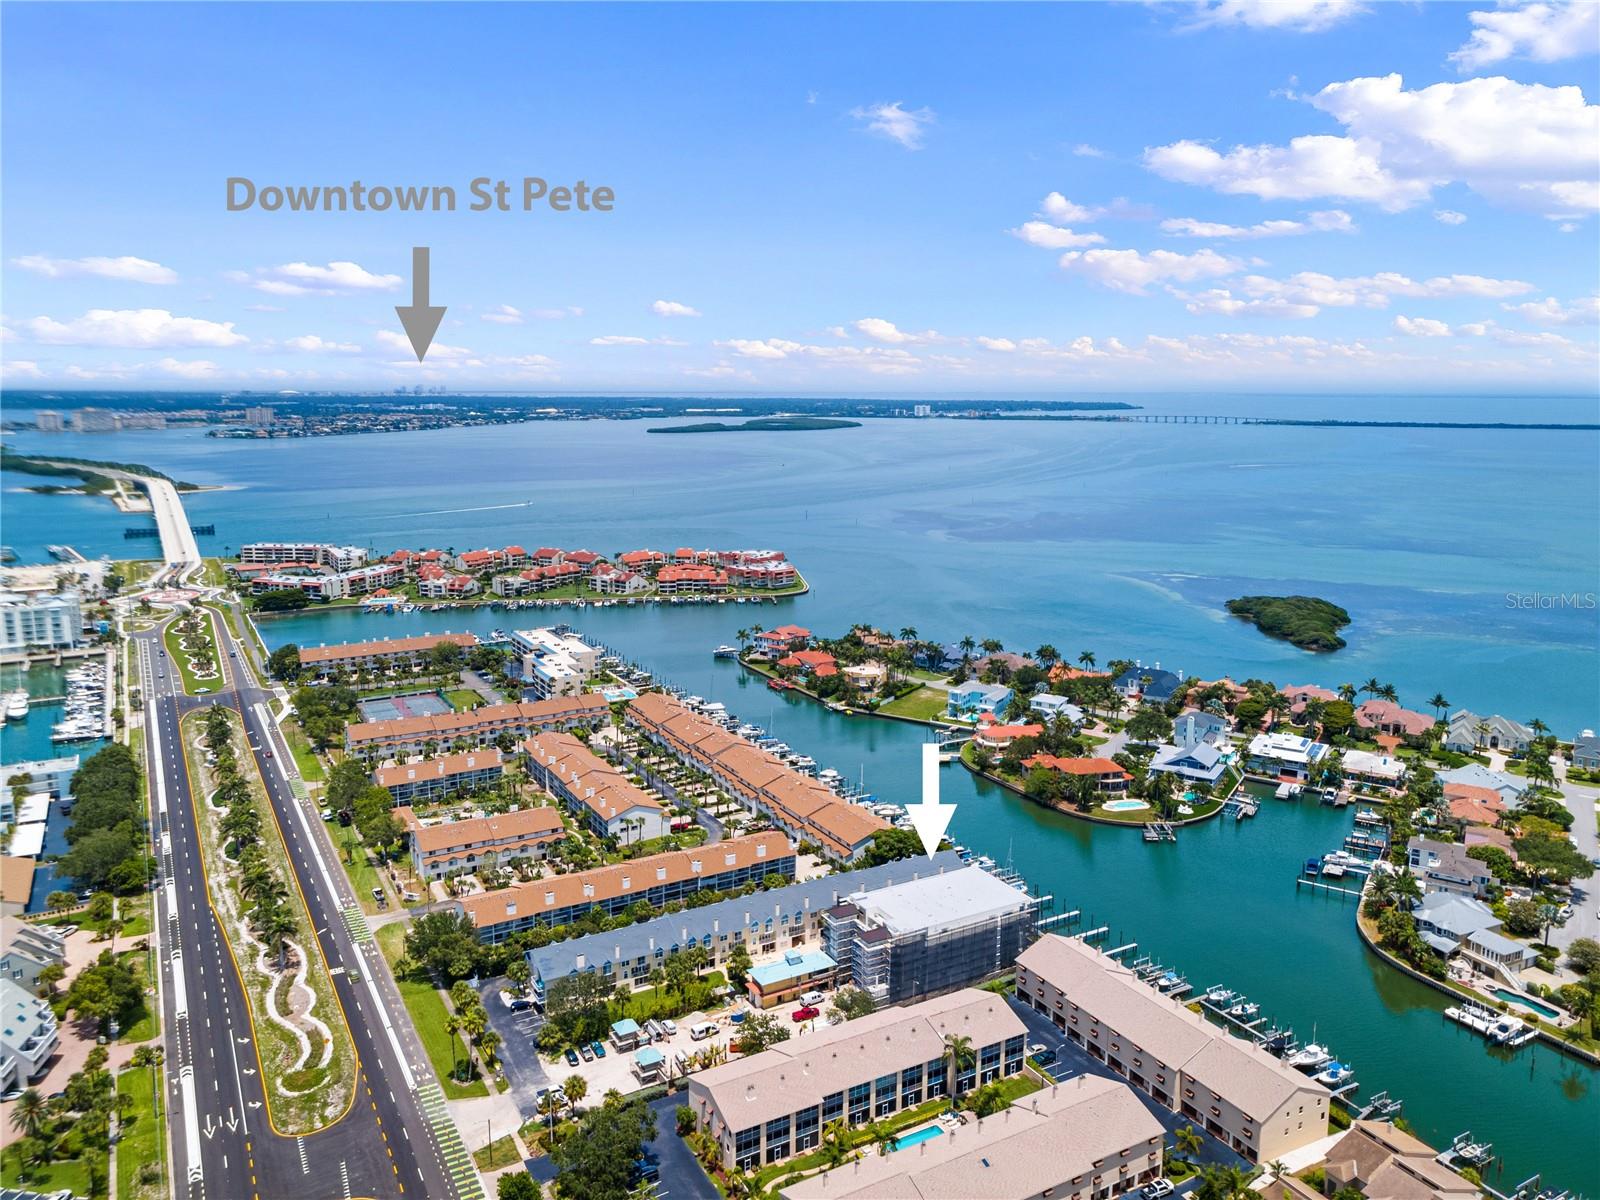 Quiet Cove is only 15 minutes away from downtown St Pete.  So enjoy the boating and fishing at Quiet Cove during the day and head downtown for nightlife.